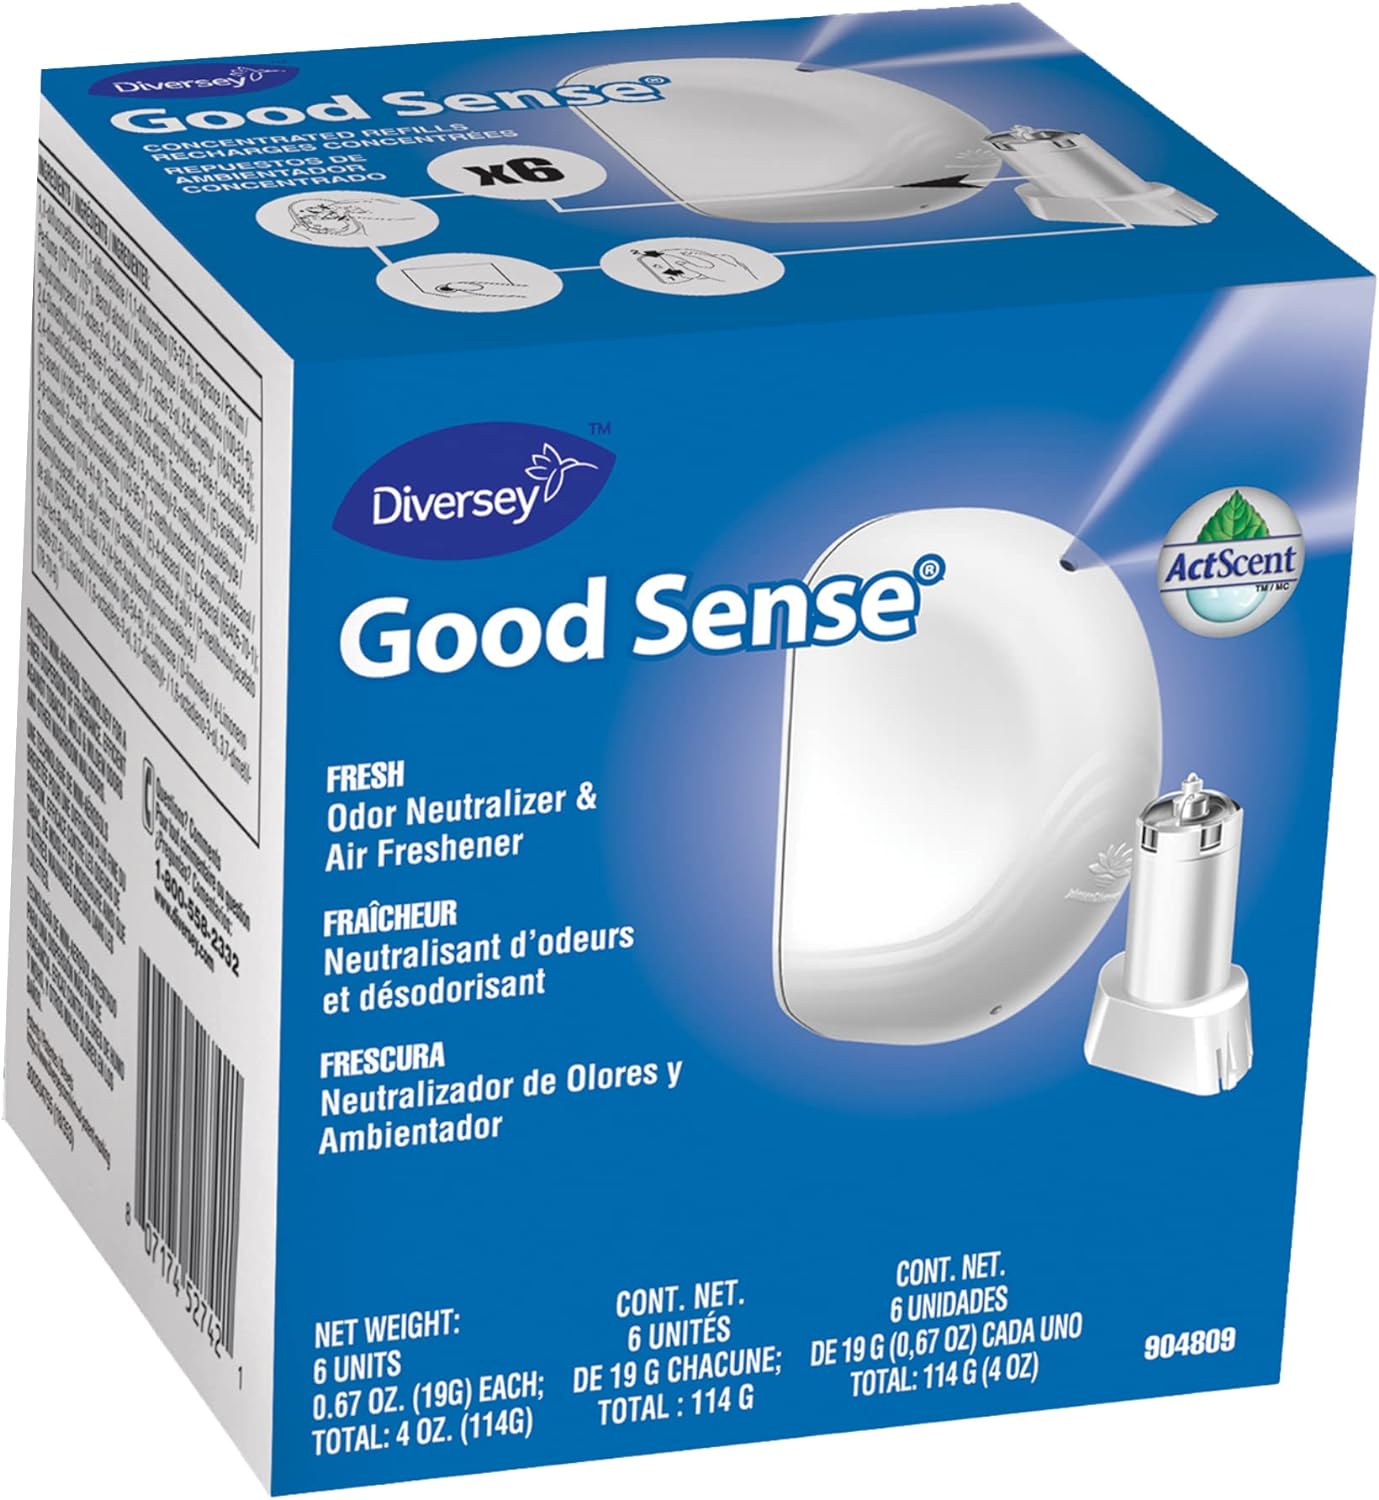 Diversey Good Sense 904809 Automatic Spray System, Odor Neutralizer and Air Freshener, 12 x 19 gal/0.67 oz. Cartridges, Fresh (Pack of 12): Industrial & Scientific